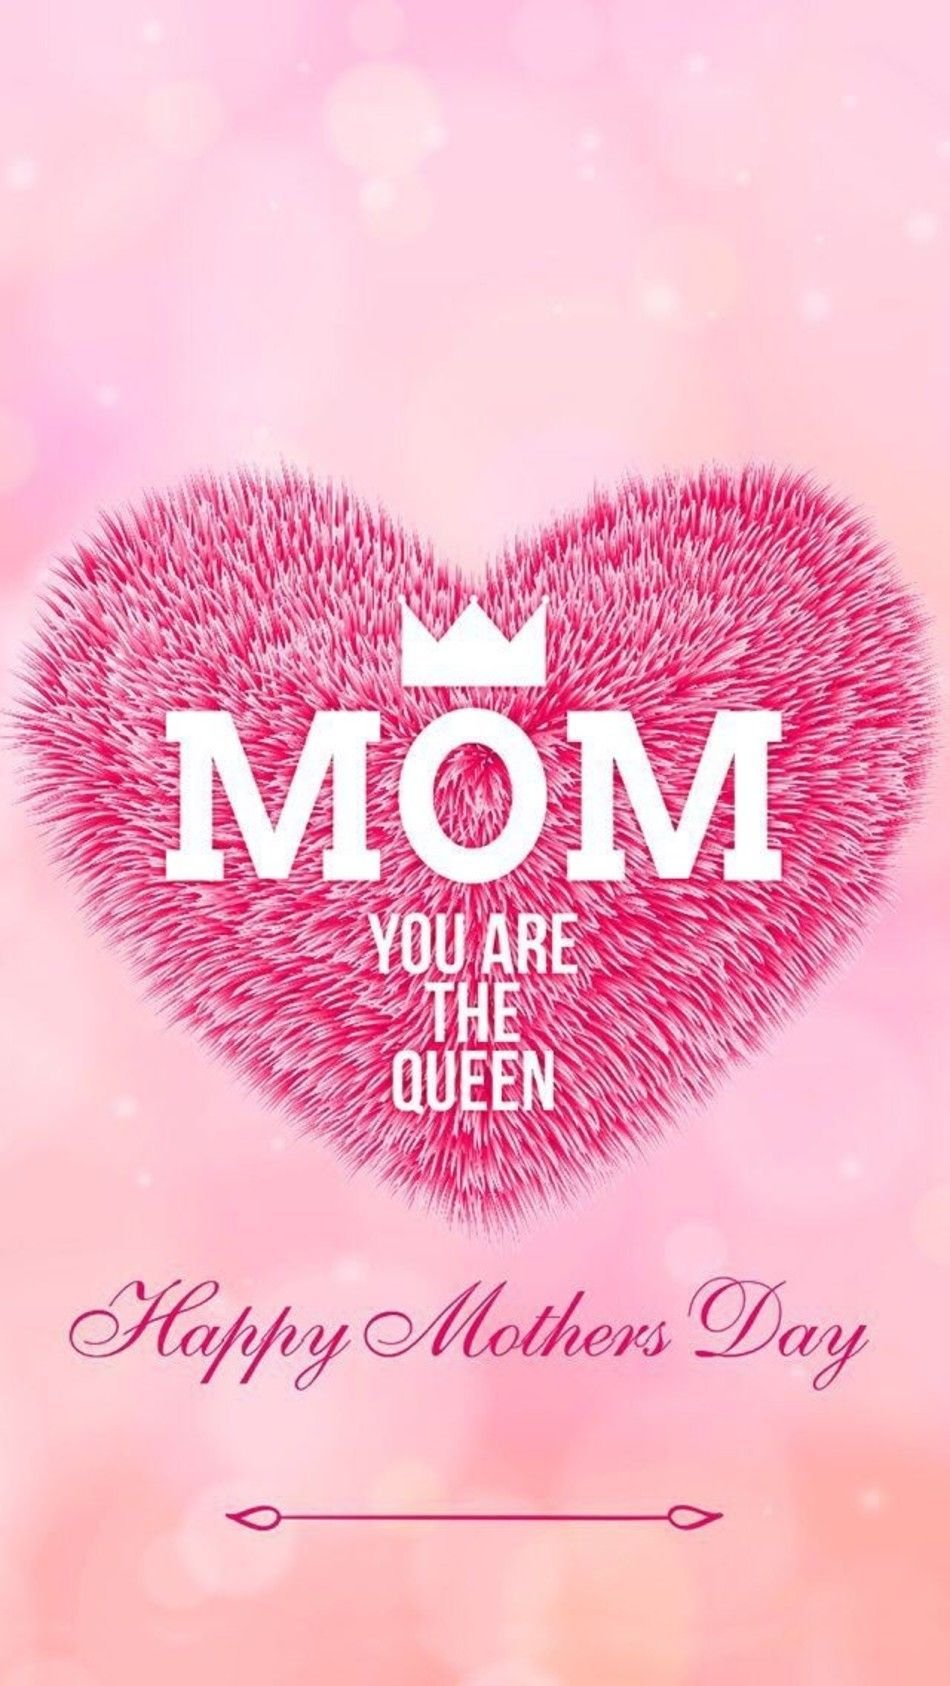 Happy Mothers Day Wallpaper Images  Free Download on Freepik